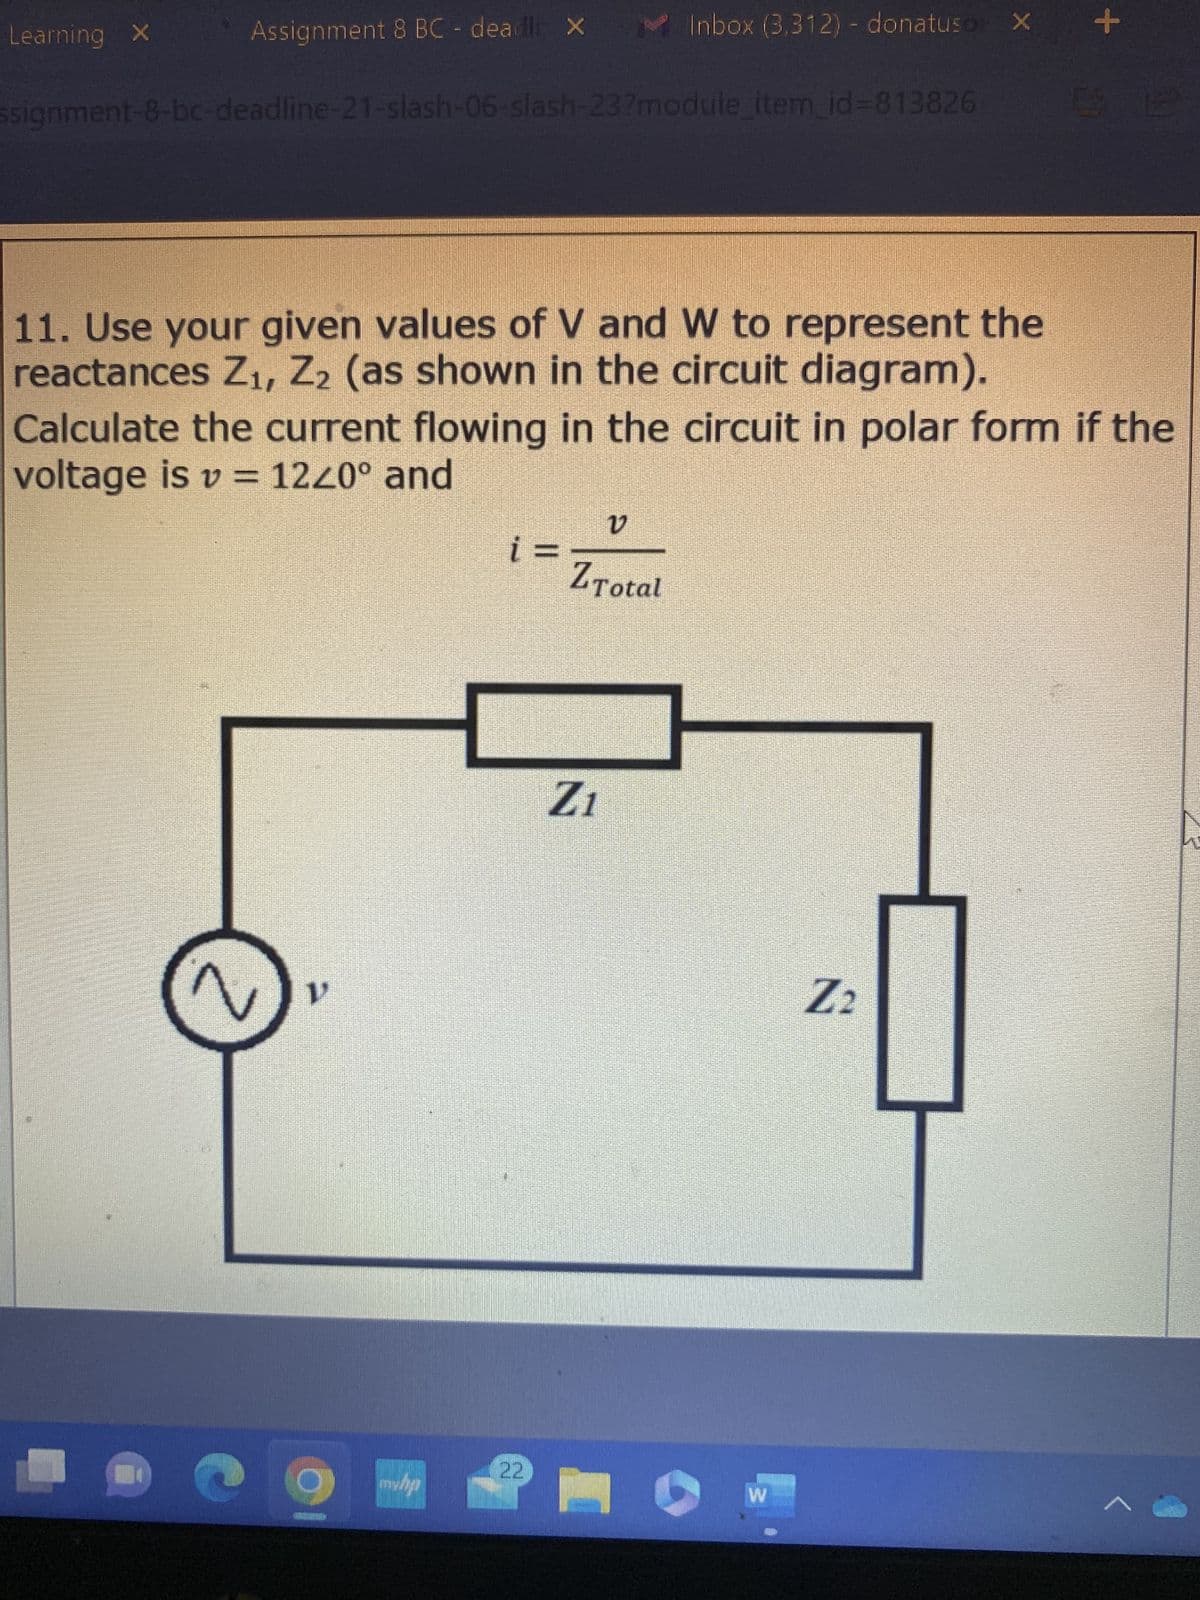 Learning X
Assignment 8 BC - deadli X
signment-8-bc-deadline-21-slash-06-slash-23?module_item_id=813826
11. Use your given values of V and W to represent the
reactances Z₁, Z2 (as shown in the circuit diagram).
n
Calculate the current flowing in the circuit in polar form if the
voltage is v= 1240° and
myhp
i =
22
Inbox (3,312) - donatuso X
v
Z Total
Z1
W
+
Z₂